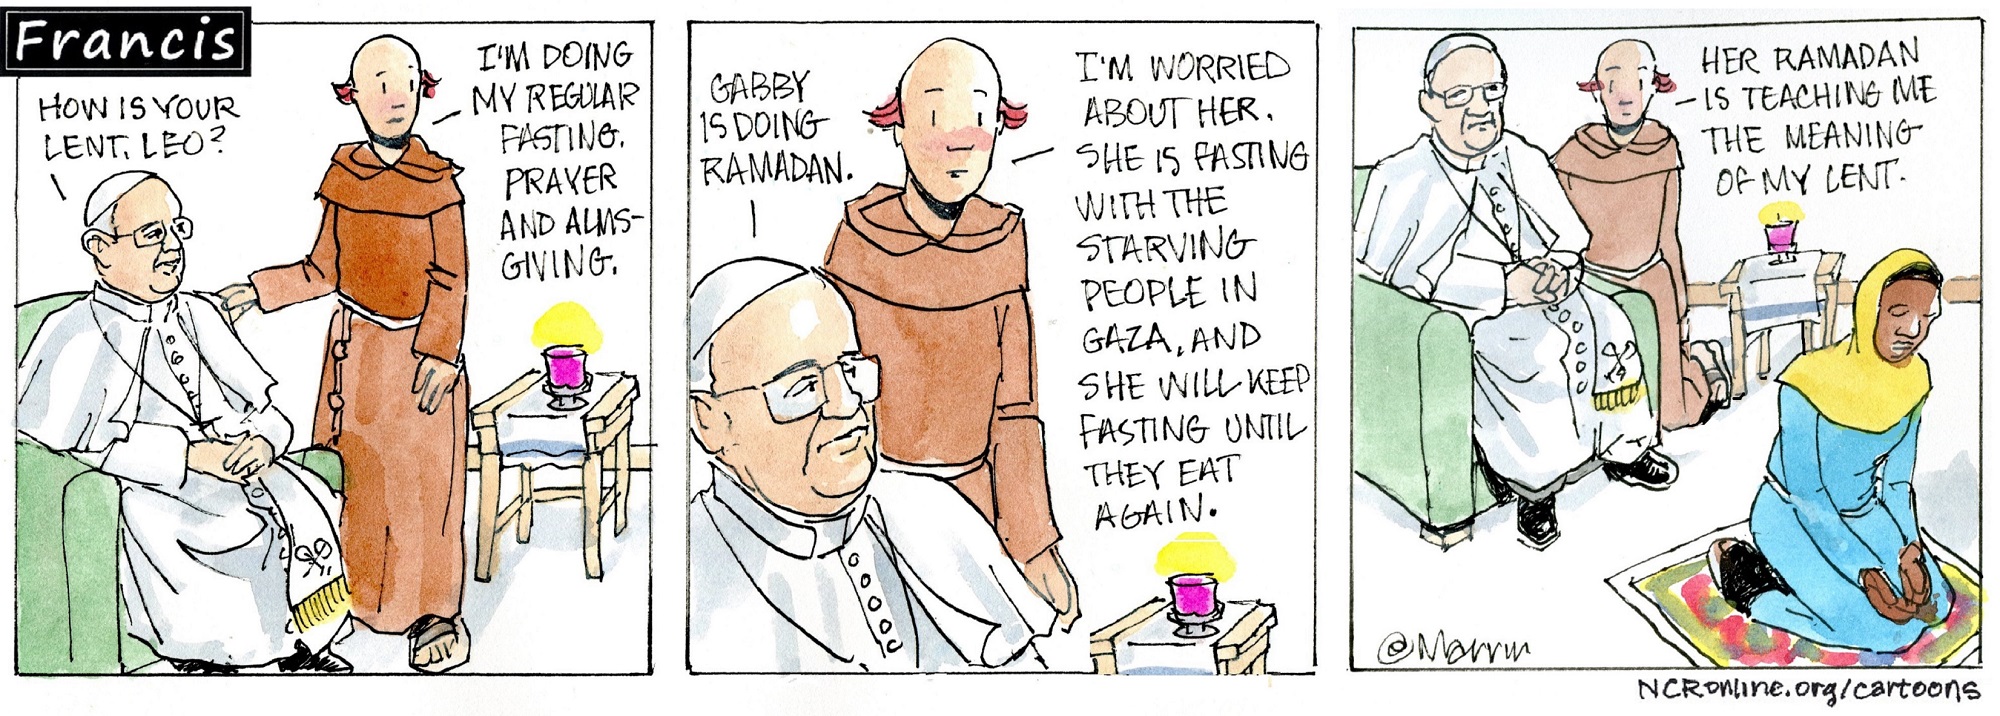 Francis, the comic strip: Francis checks in to see how Lent is going.